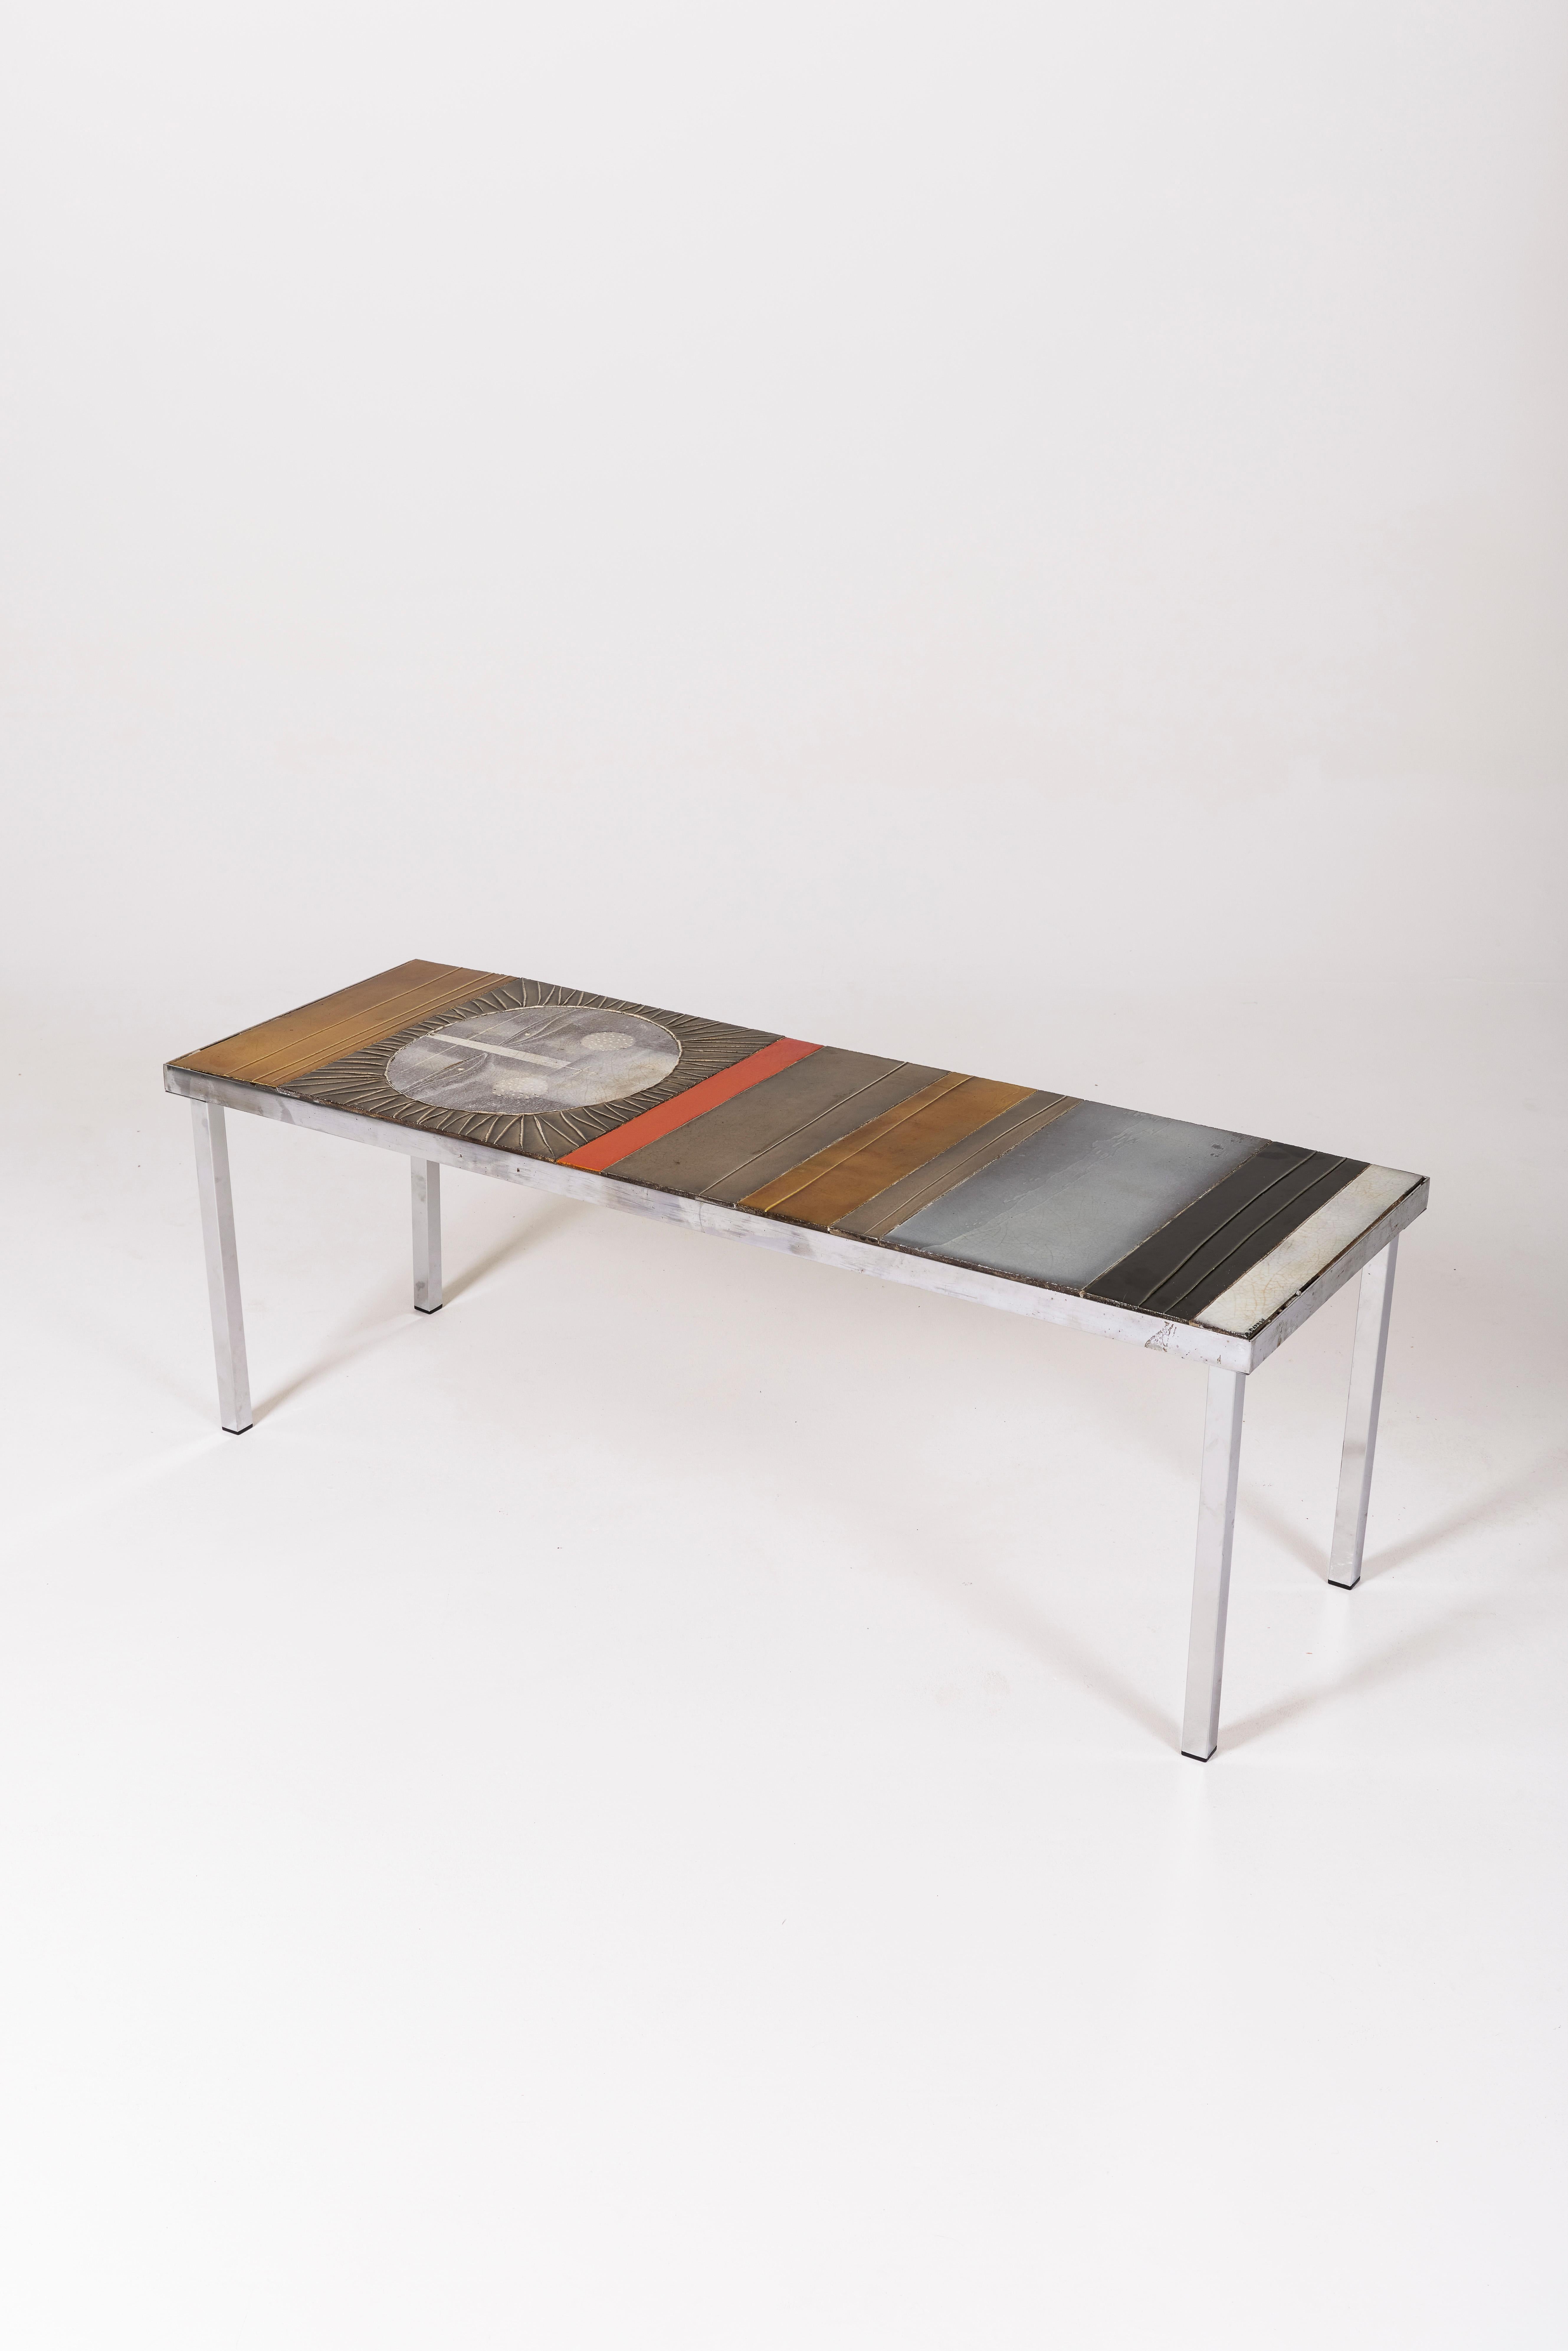 Coffee table, Soleil model, by Roger Capron, 1960s. Ceramic tabletop with a sun motif. The base is made of chromed metal. Excellent condition.
LP1254
